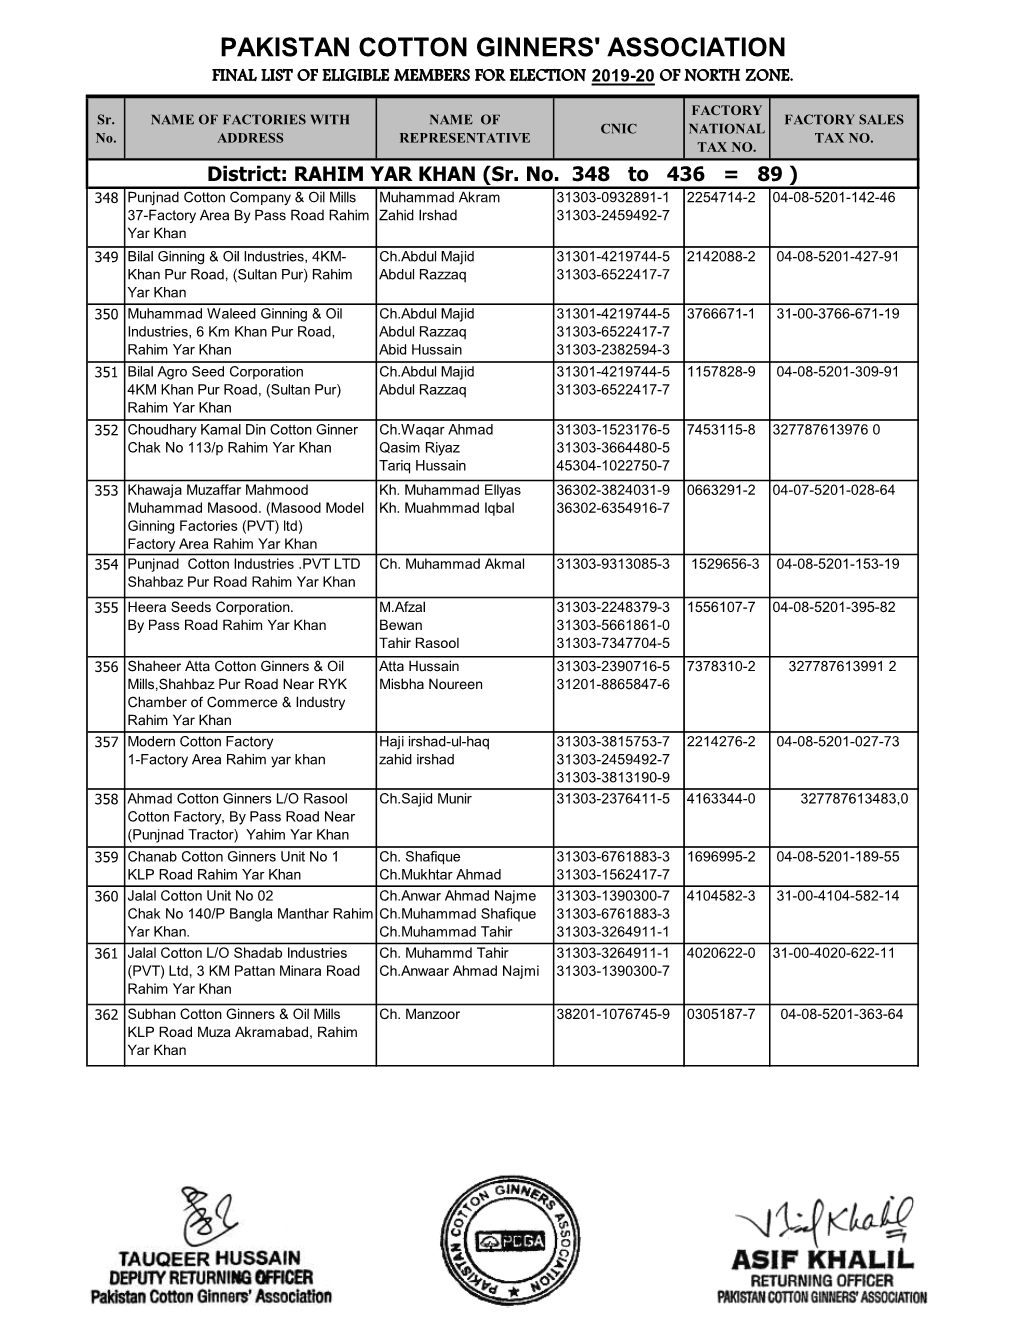 Pakistan Cotton Ginners' Association Final List of Eligible Members for Election 2019-20 of North Zone